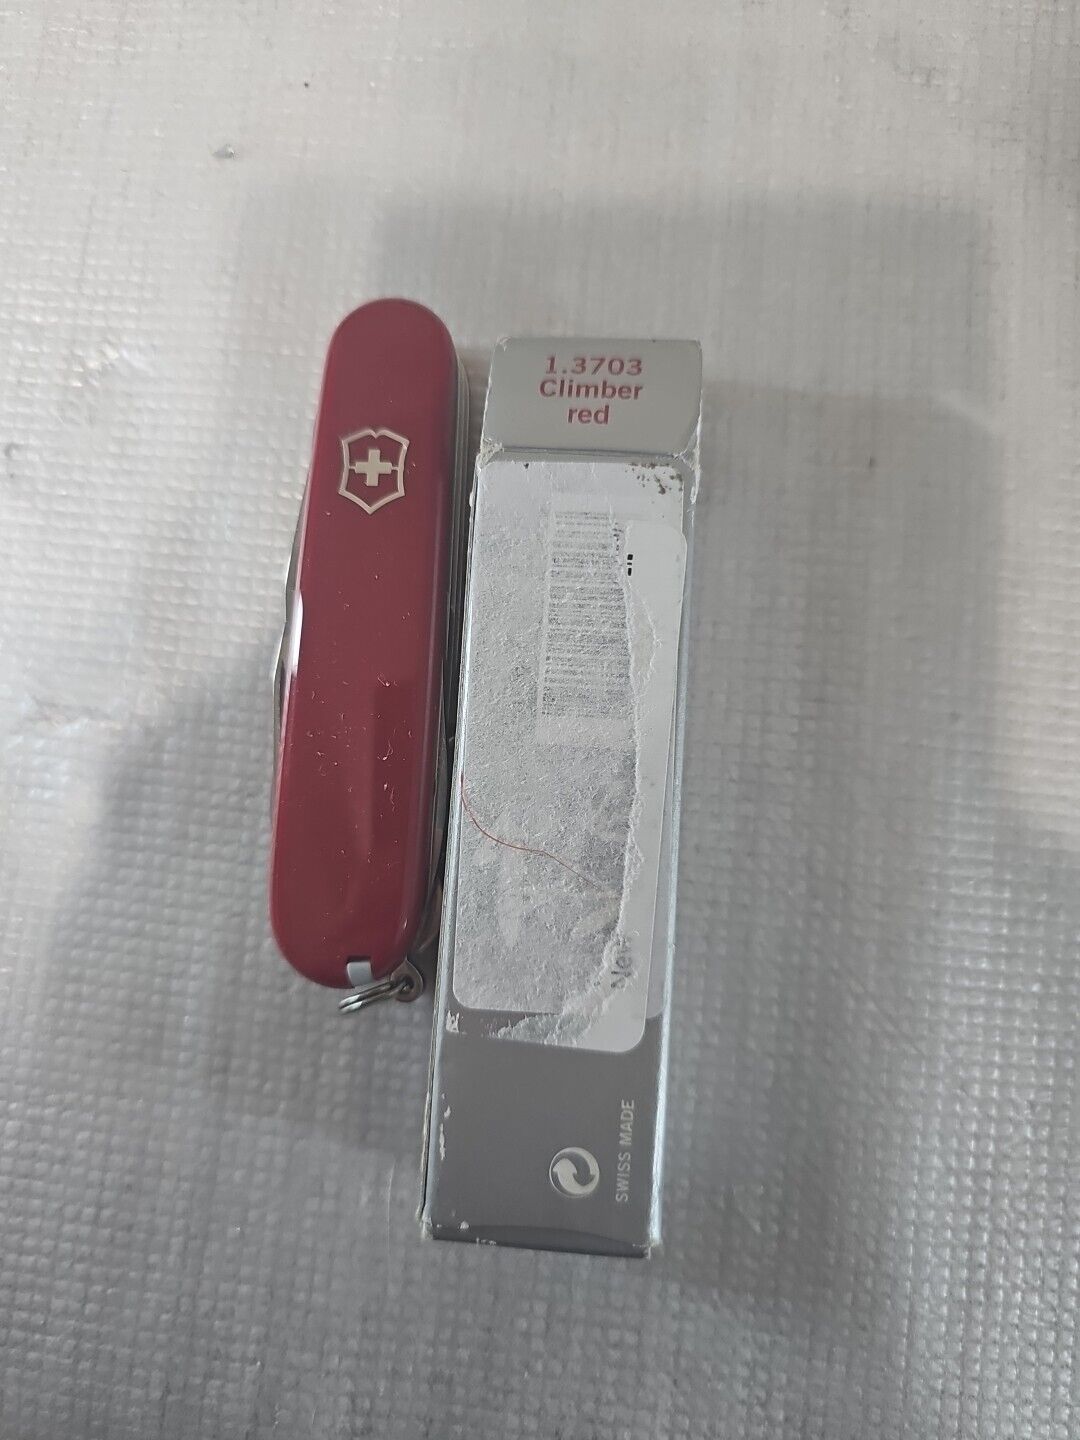 Victorinox Climber Swiss Army Knives - Red 1.3703